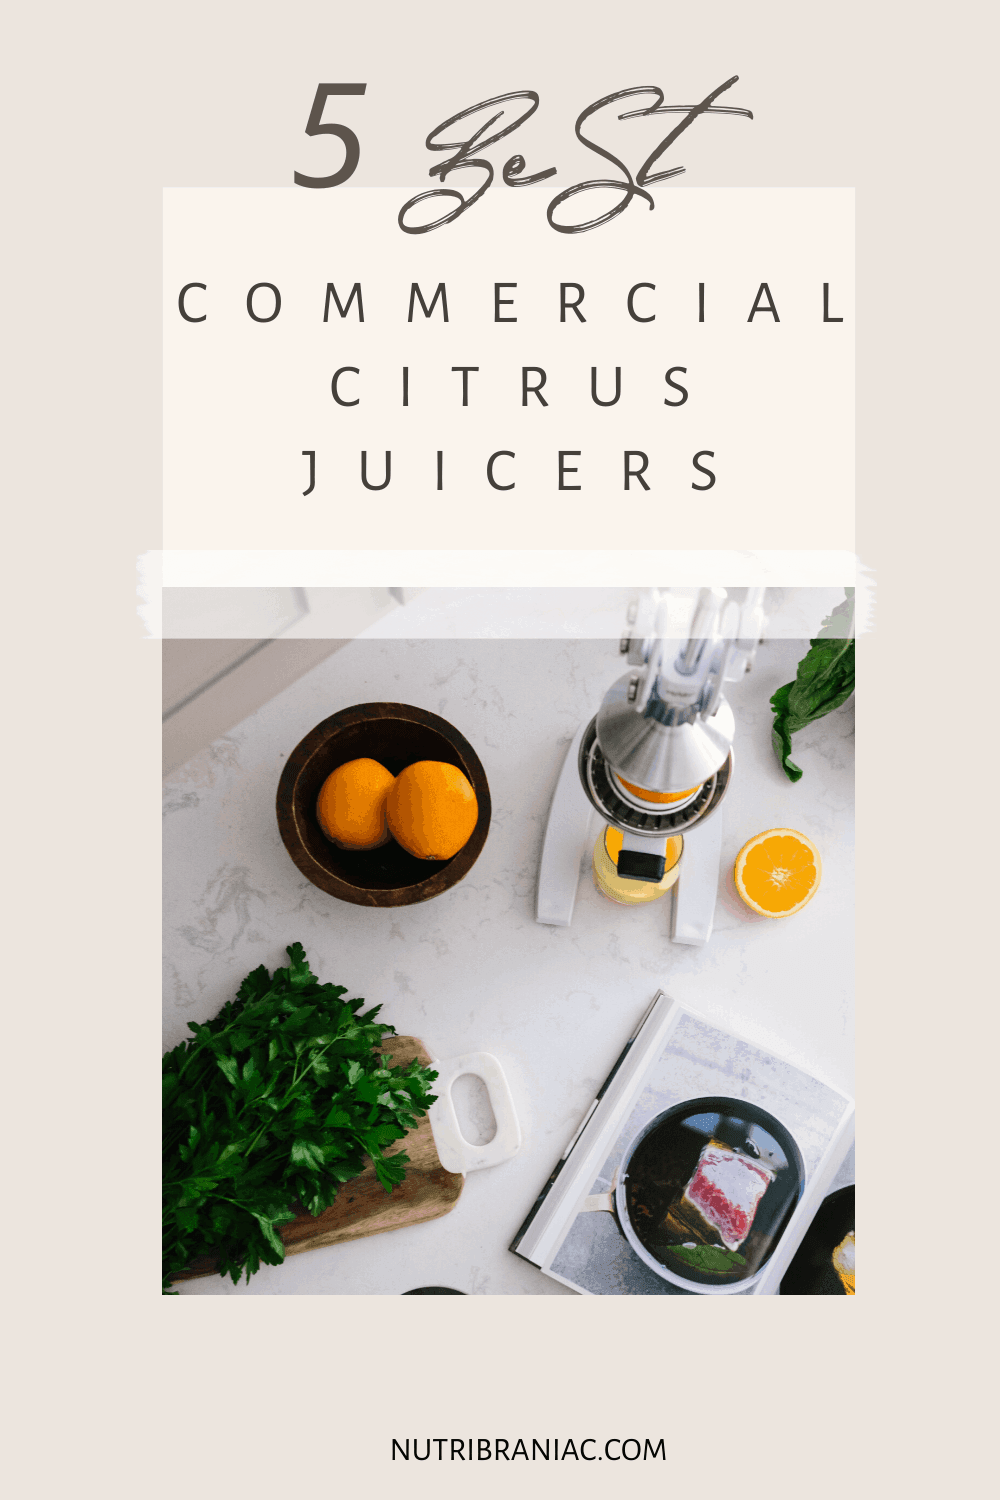 Love fresh orange juice in the morning? Then you need the right citrus juicer.  Whether you own a juice bar or are just juicing at home, the right equipment makes all the difference.  Check out our buyer's guide to the best commercial citrus juicer to get the most out of your juicing recipes.  #bestjuicermachine #juicingforhealth #juicingforbeginners #juicingonabudget #citrusjuicermanual #healthandwellness #bestjuicertobuy